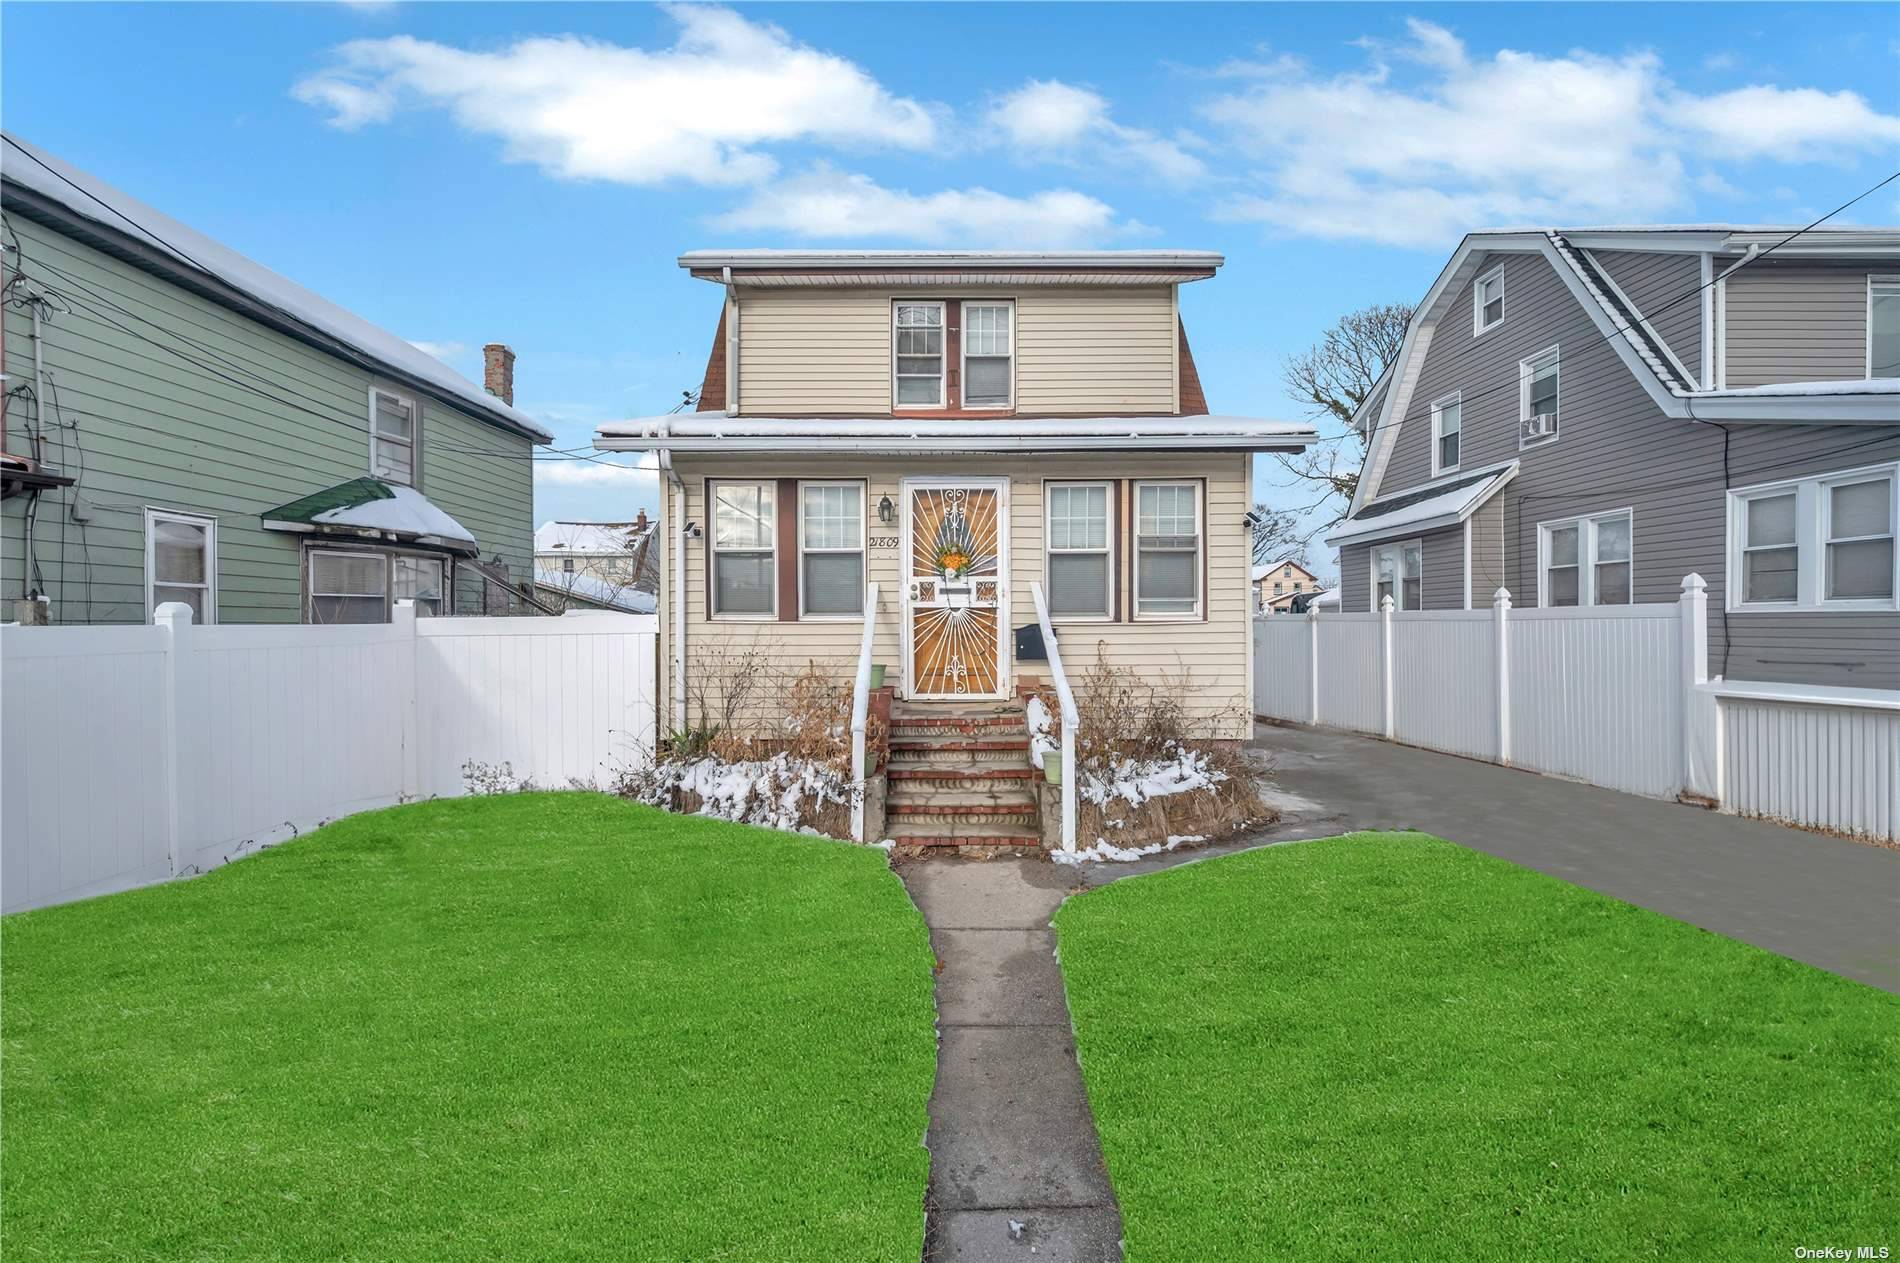 Beautiful Single Family House in Springfield Gardens, featuring 3 Bedrooms, 2 Full Bathrooms, Living amp ; Dining Room, Kitchen, a Full Finished Basement, an attic with pulled stairs as well ...